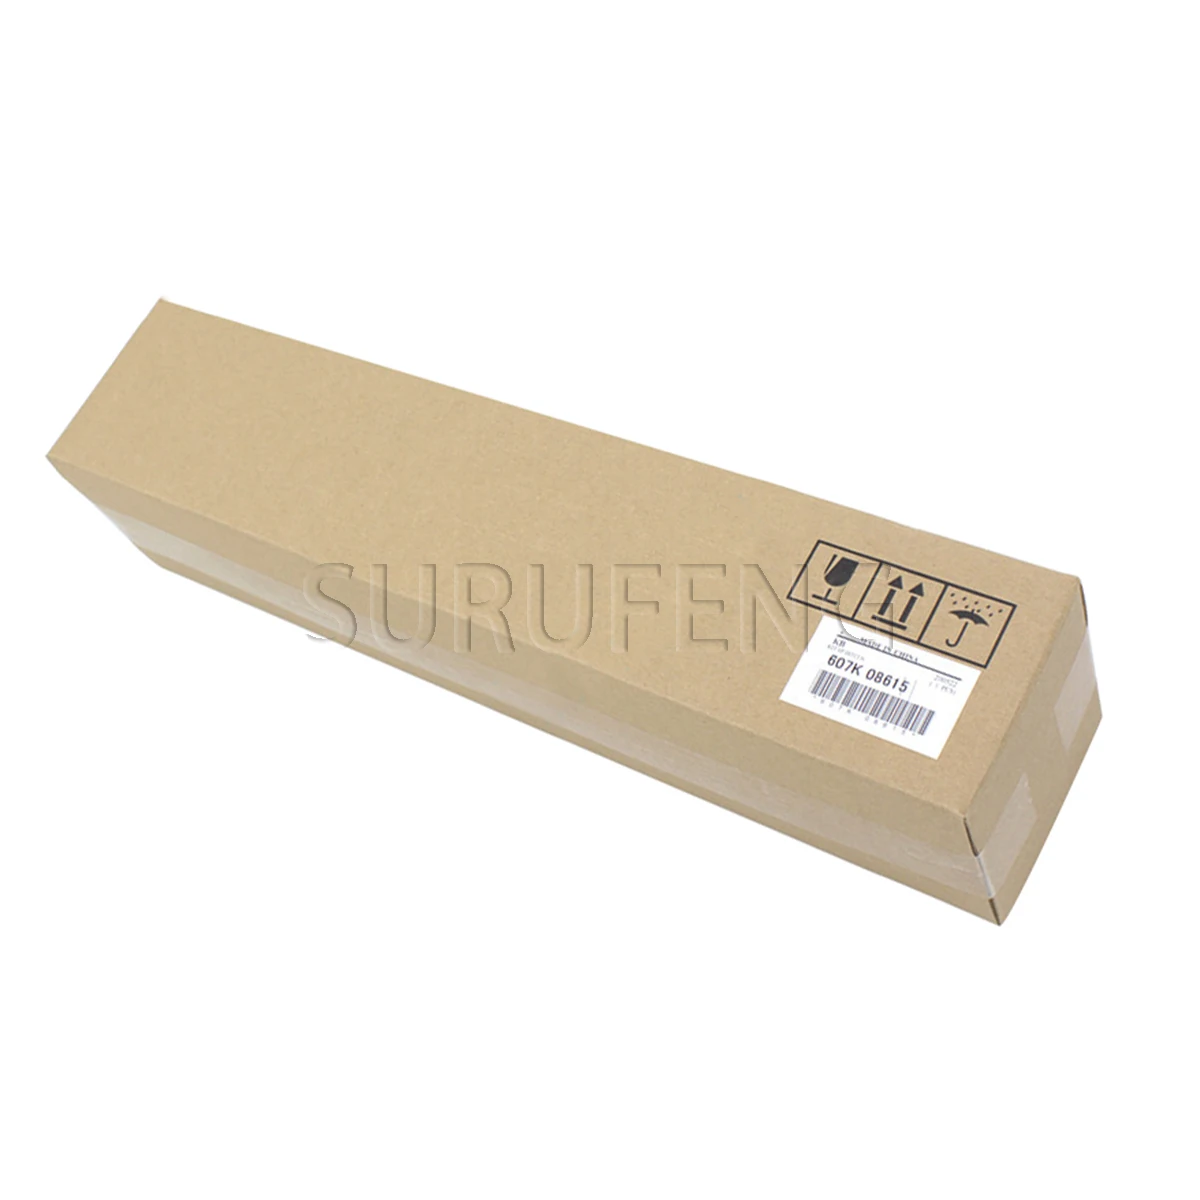 

607K08615 IBT Cleaner Assembly for Xerox VersaLink C8000 C9000 Transfer Belt Cleaning Unit